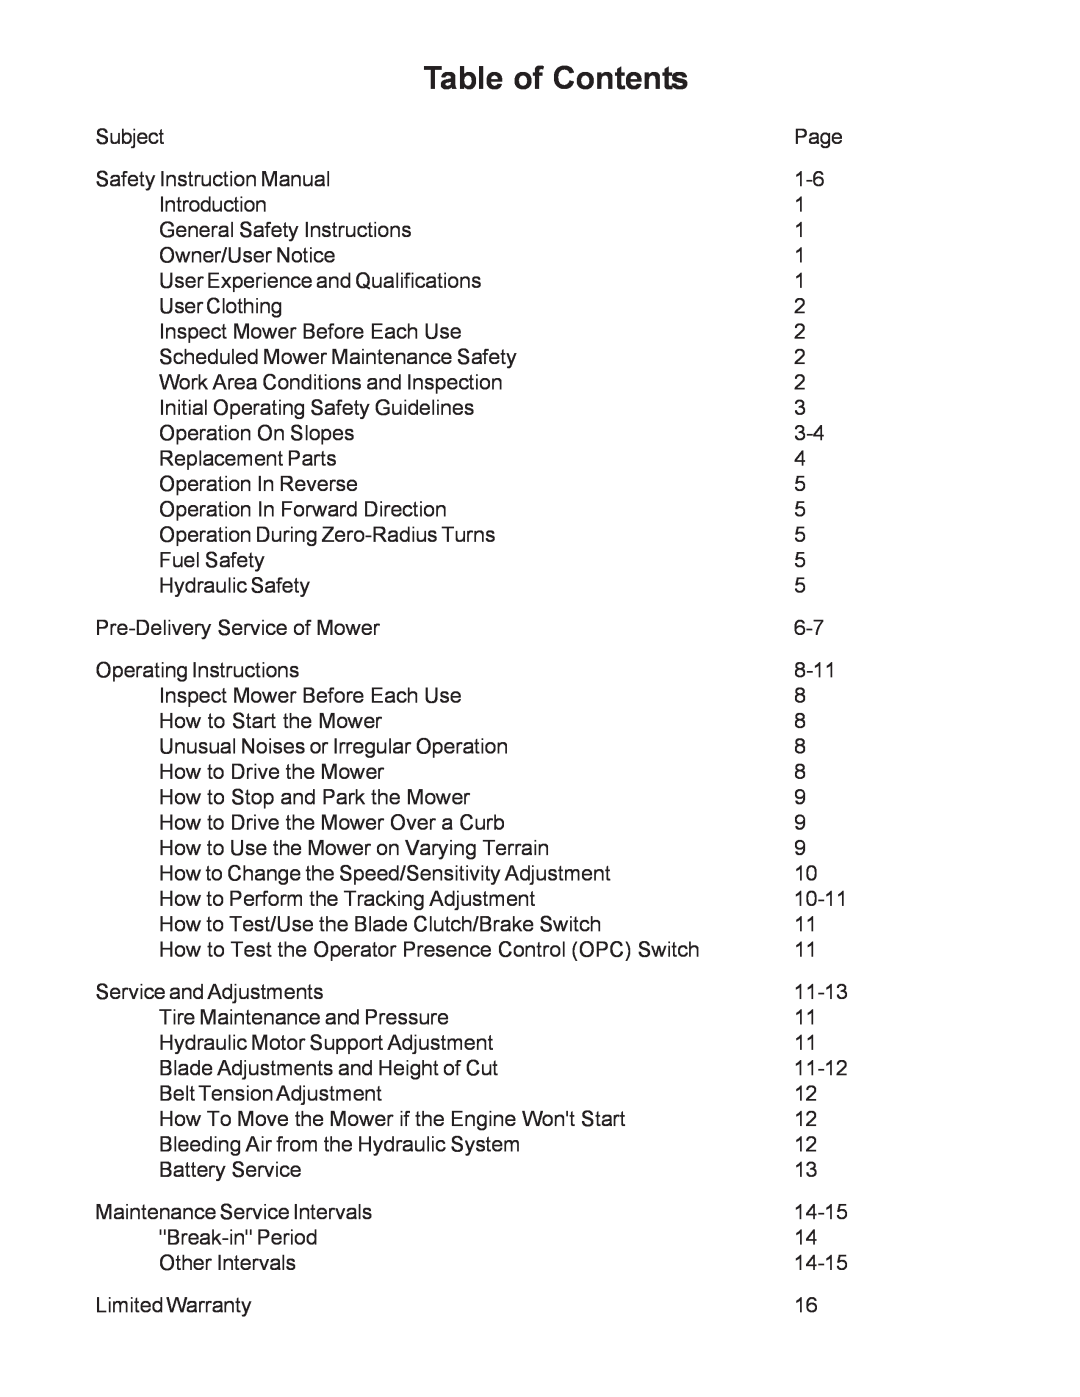 Wright Manufacturing Mower owner manual Table of Contents 